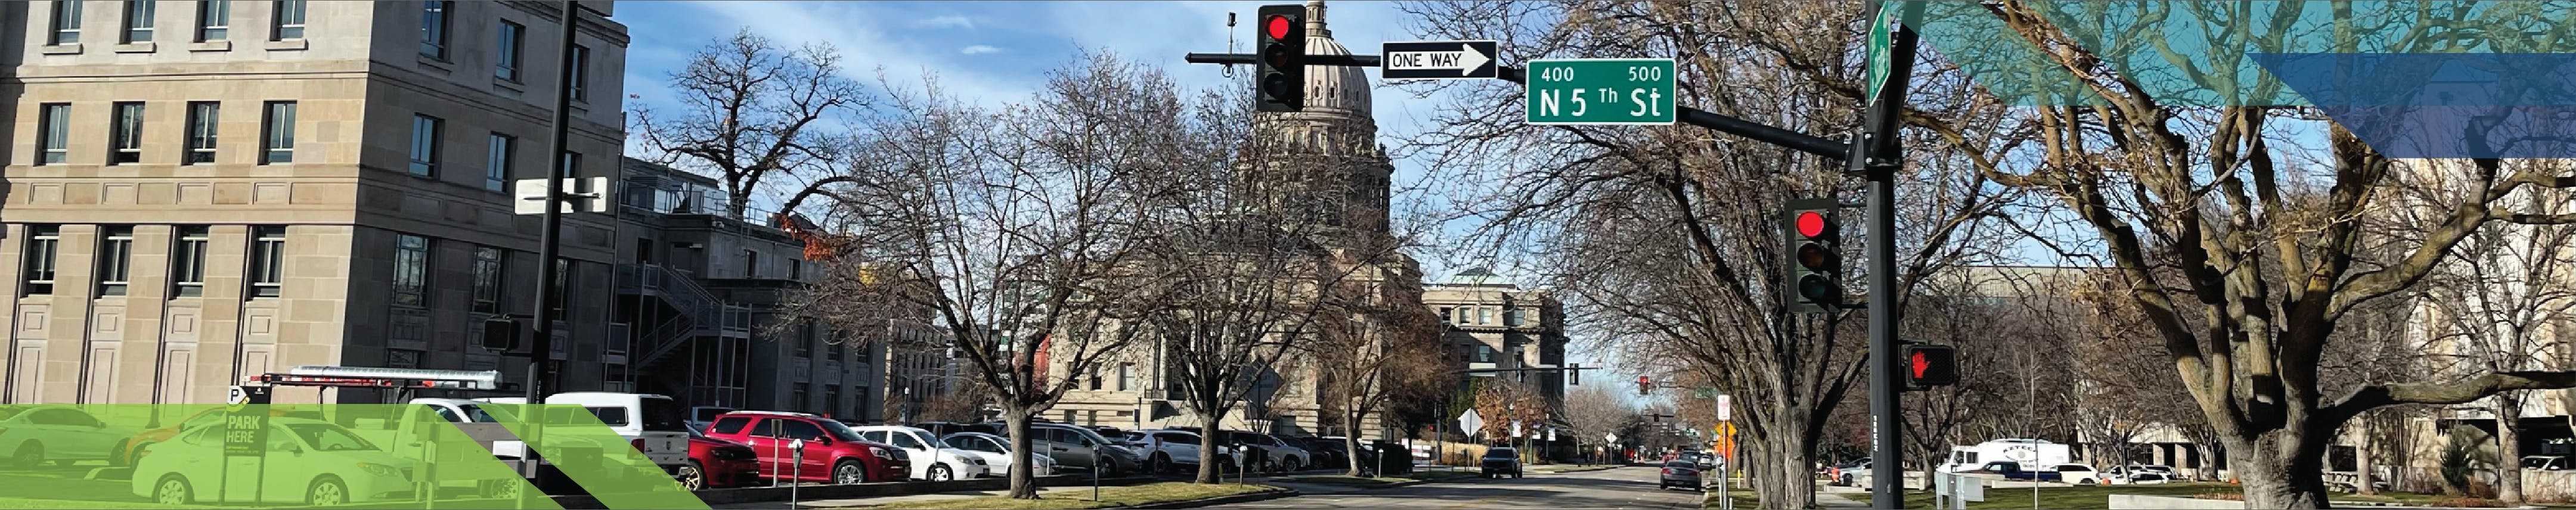 State Street at 5th Street, facing the Capitol Building